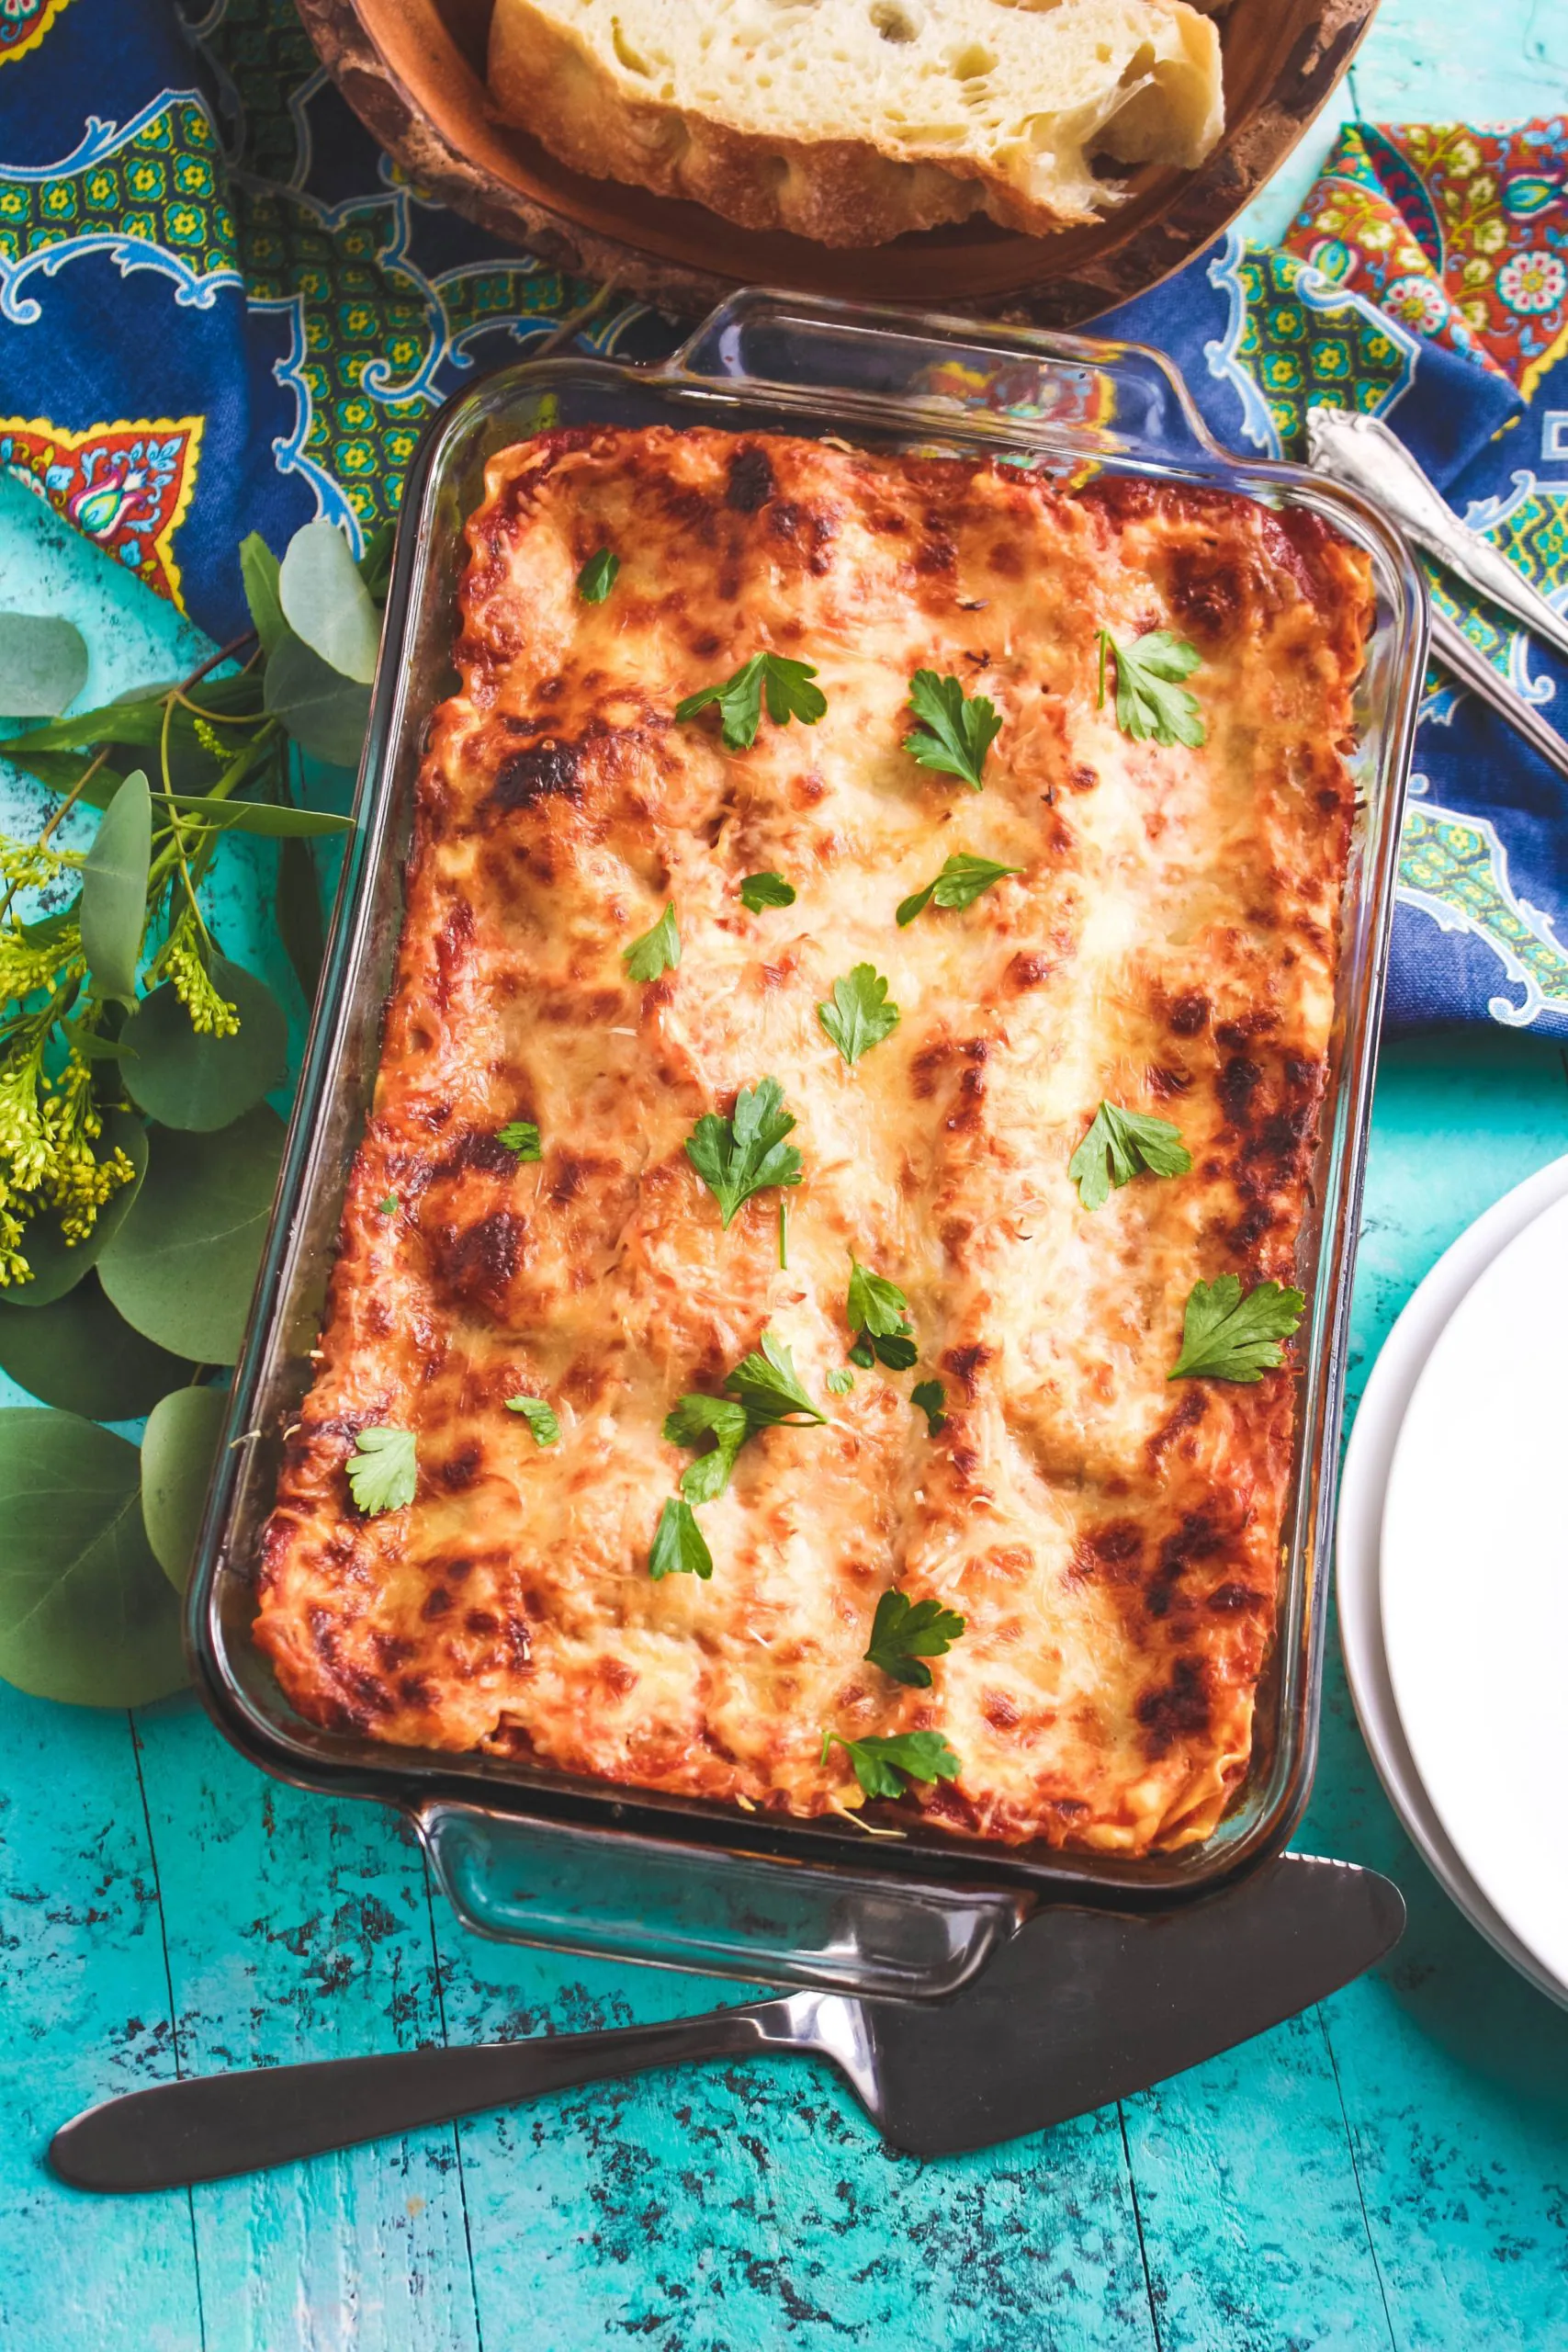 You'll love this Mushroom and Sausage Lasagna with its robust flavors!